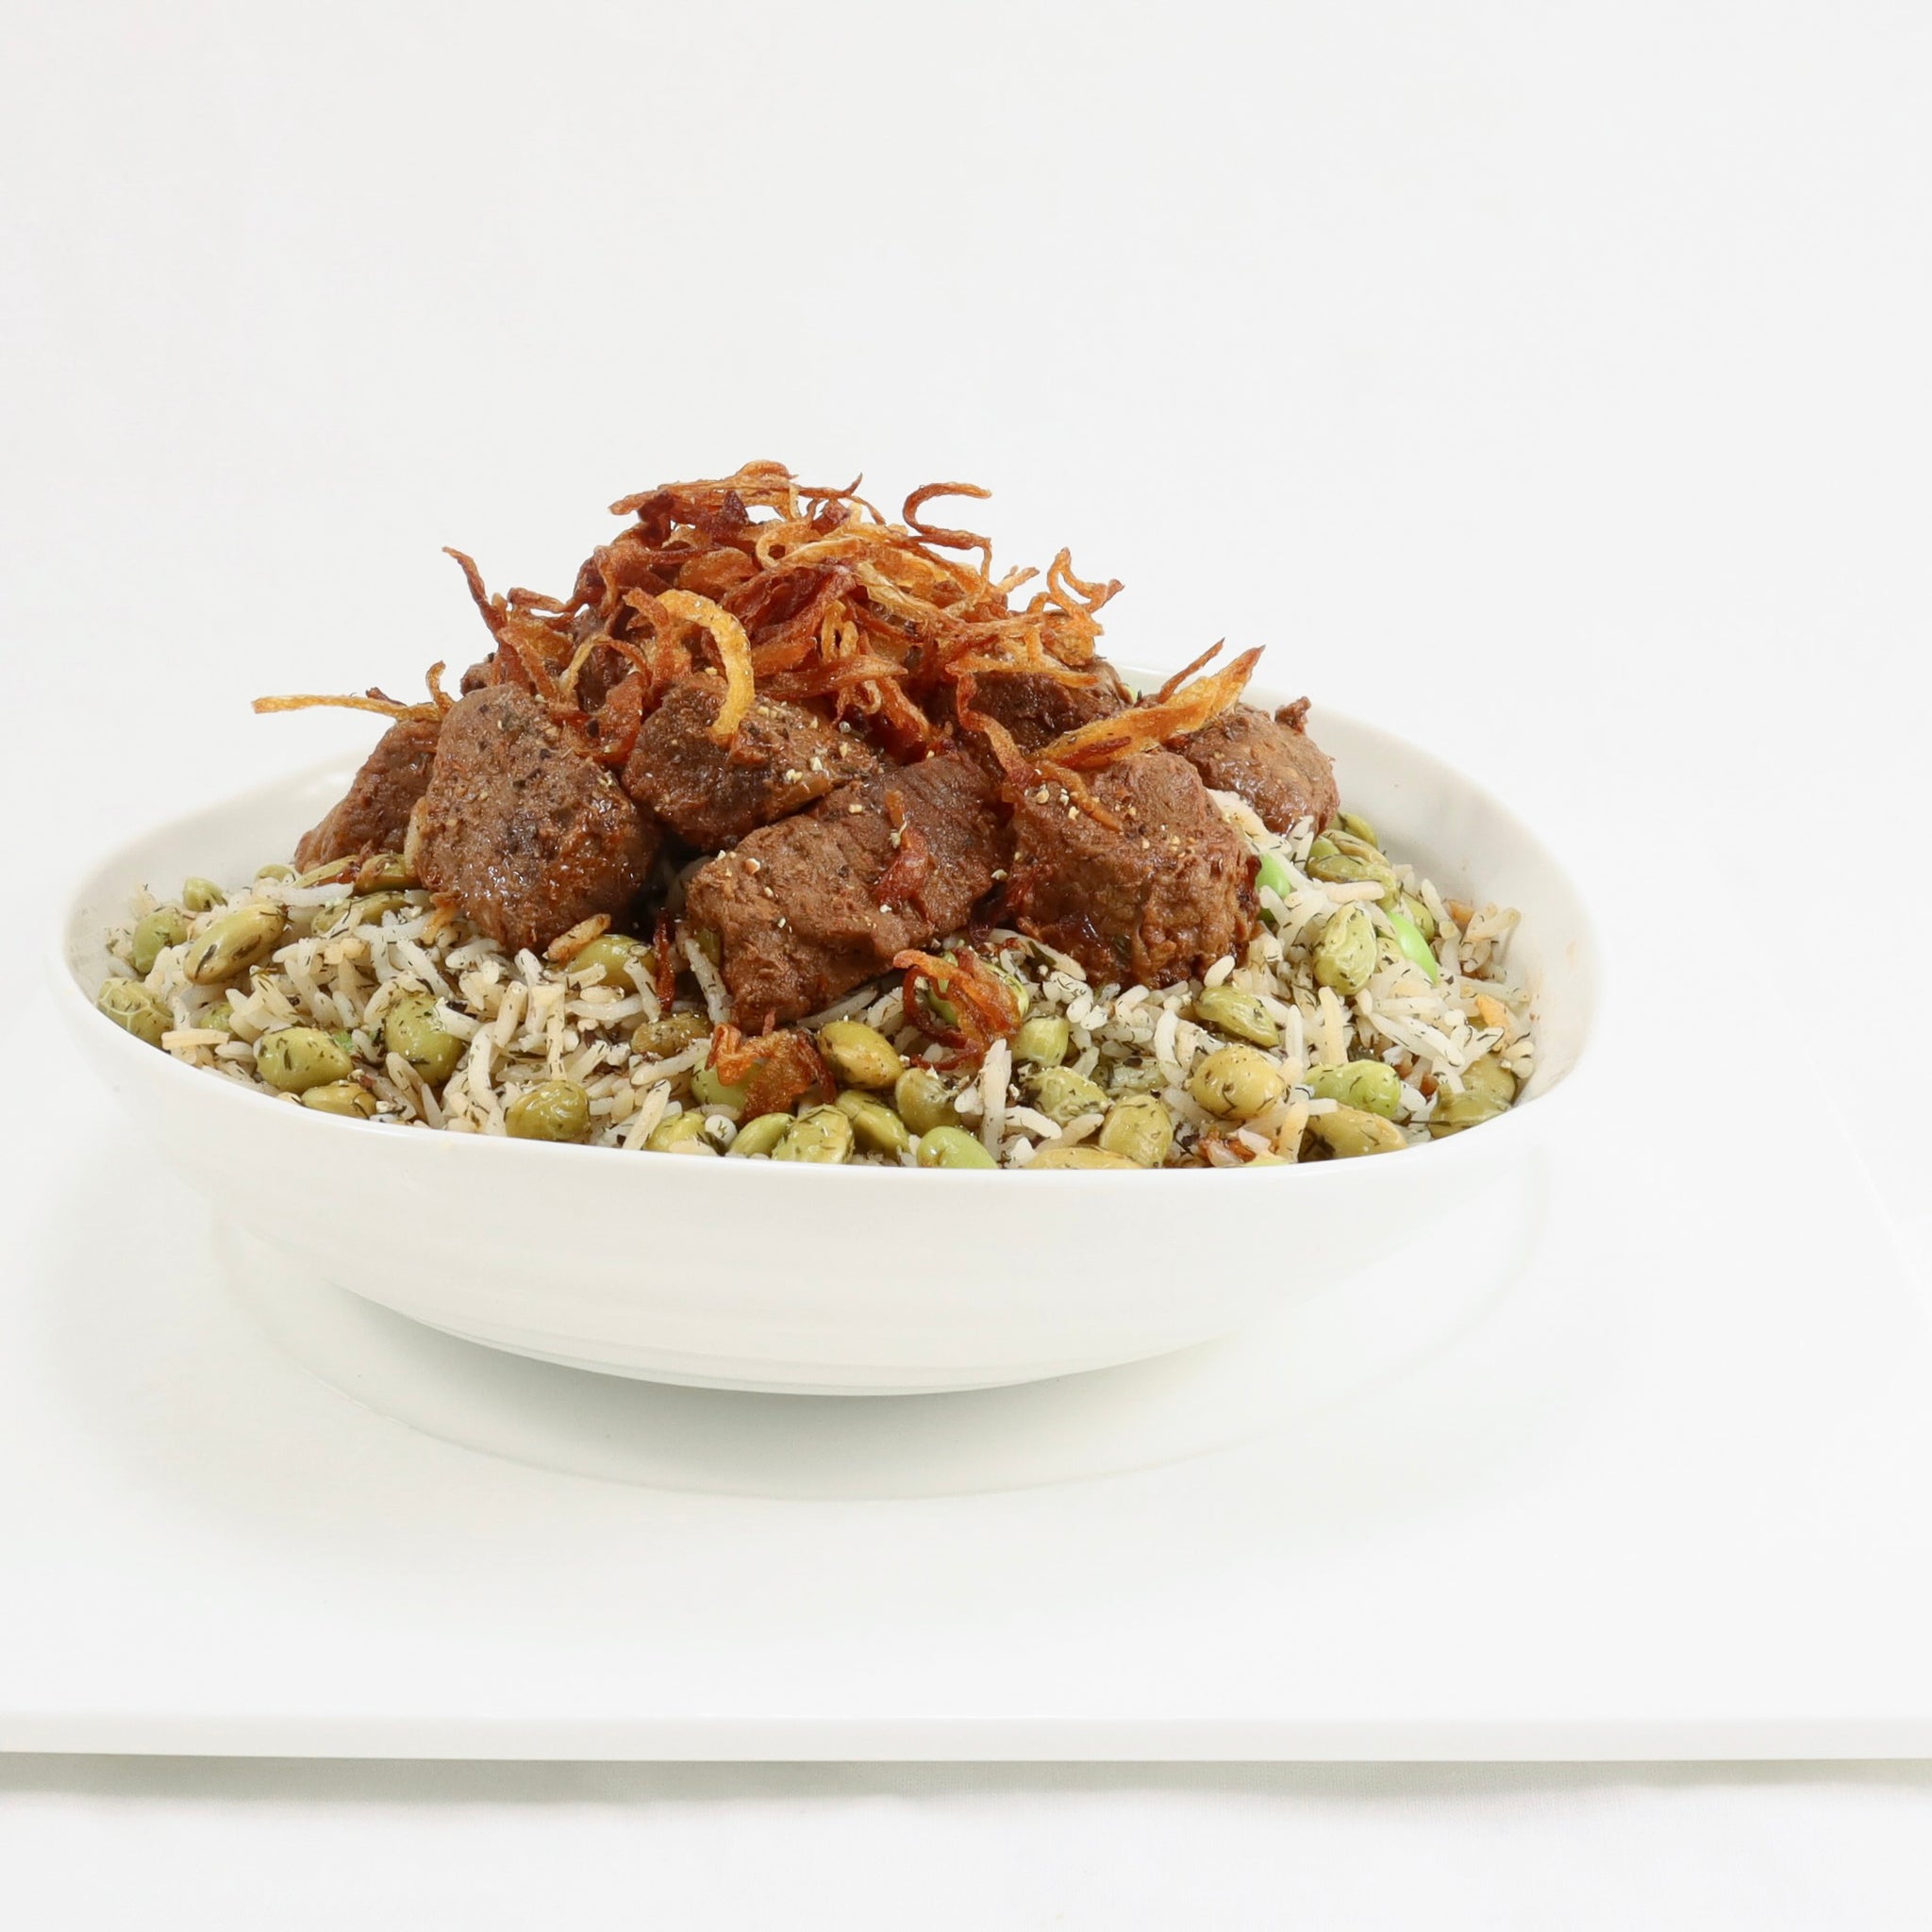 Edamame Dill Rice with Beef (Baghali Polo)